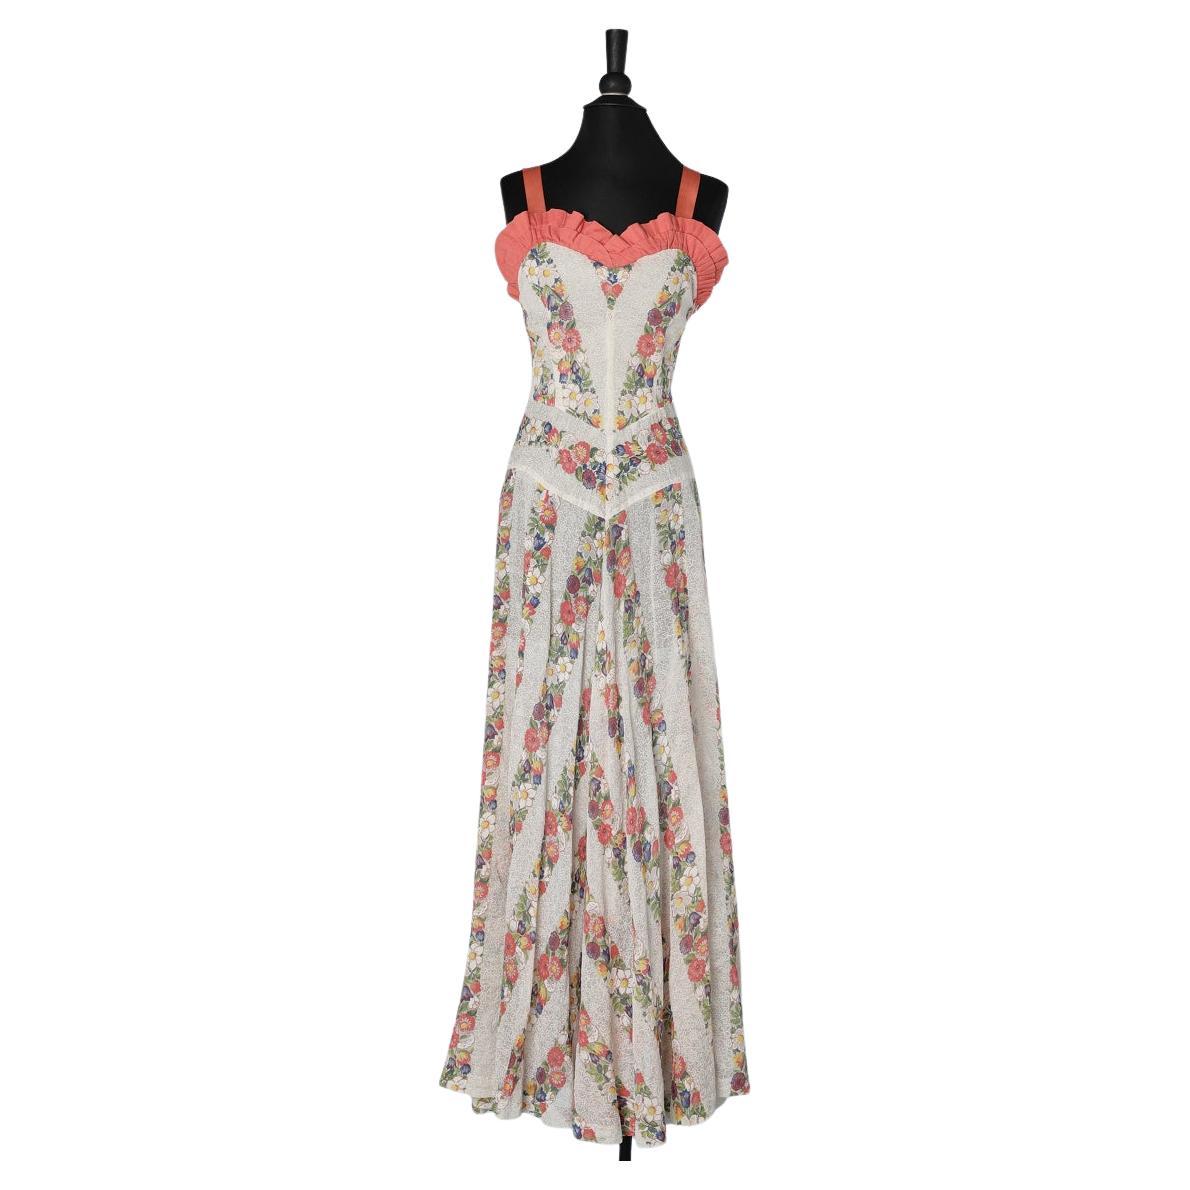 Long summer cocktail dress with flowers print and  ruffles Circa 1930/1940